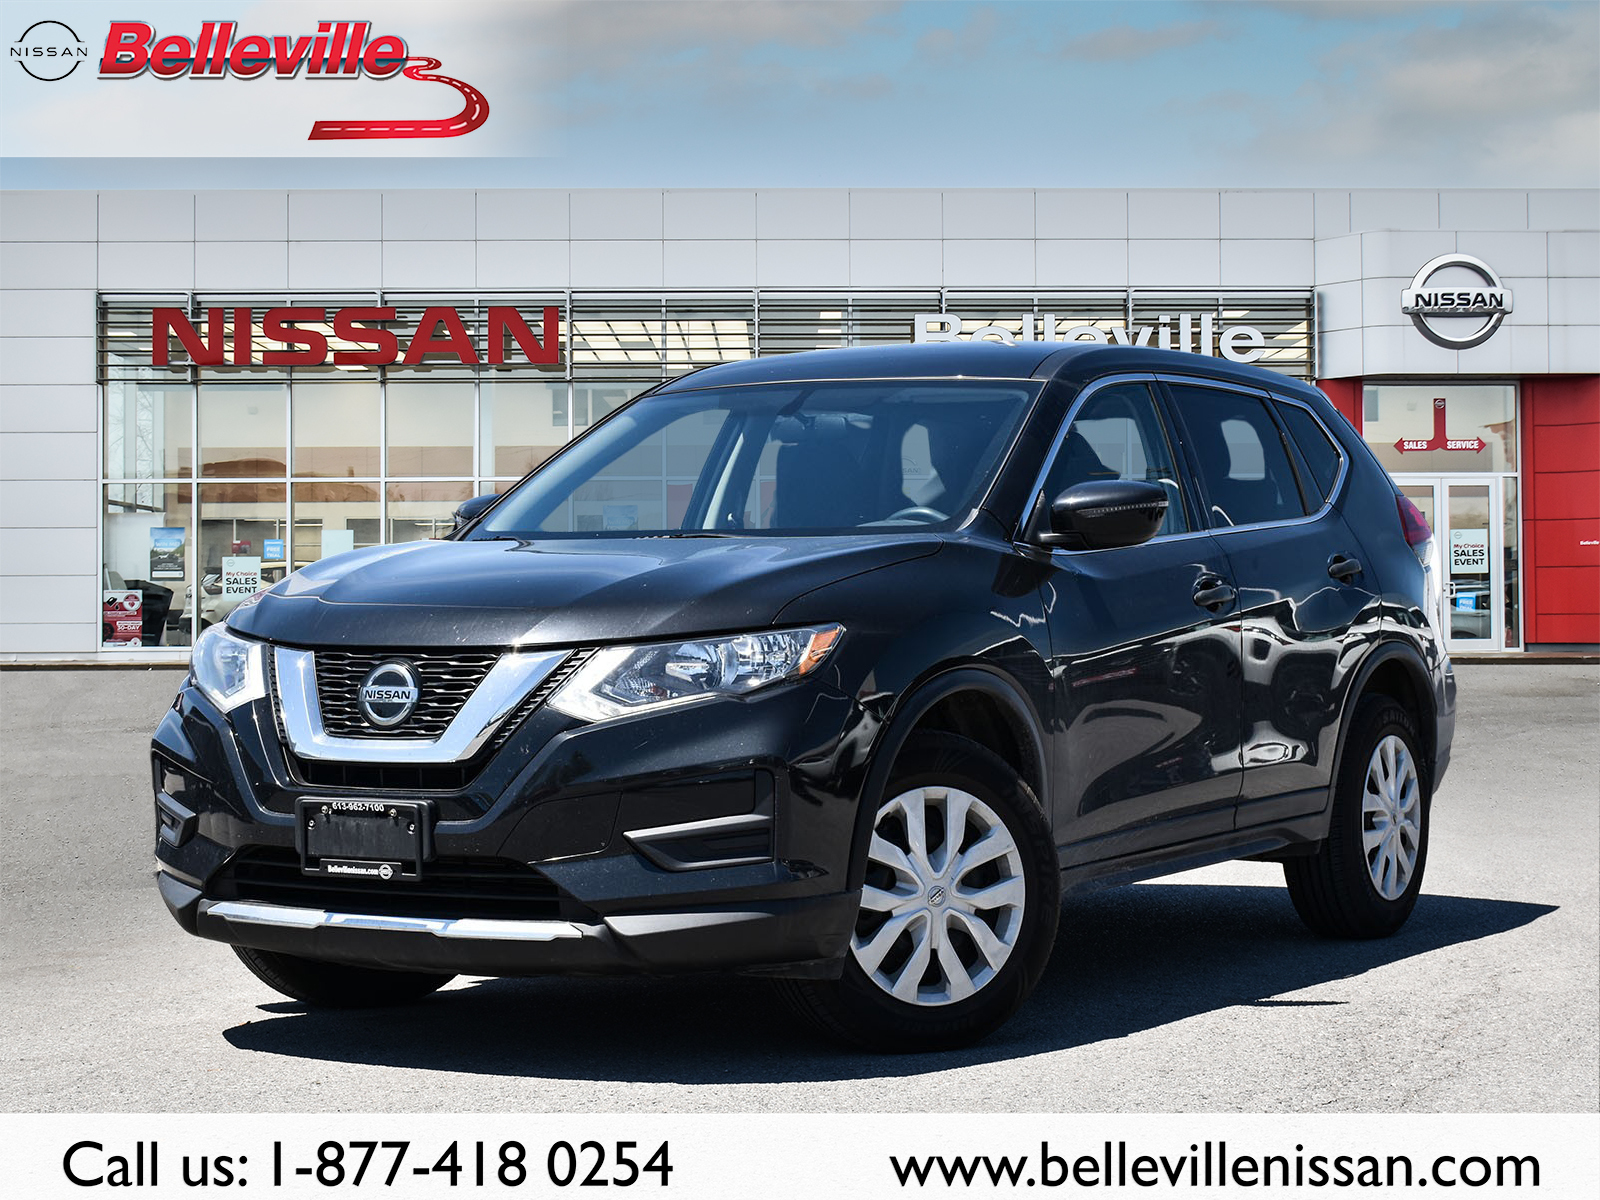 2018 Nissan Rogue S AWD, Local trade, well serviced, great shape!